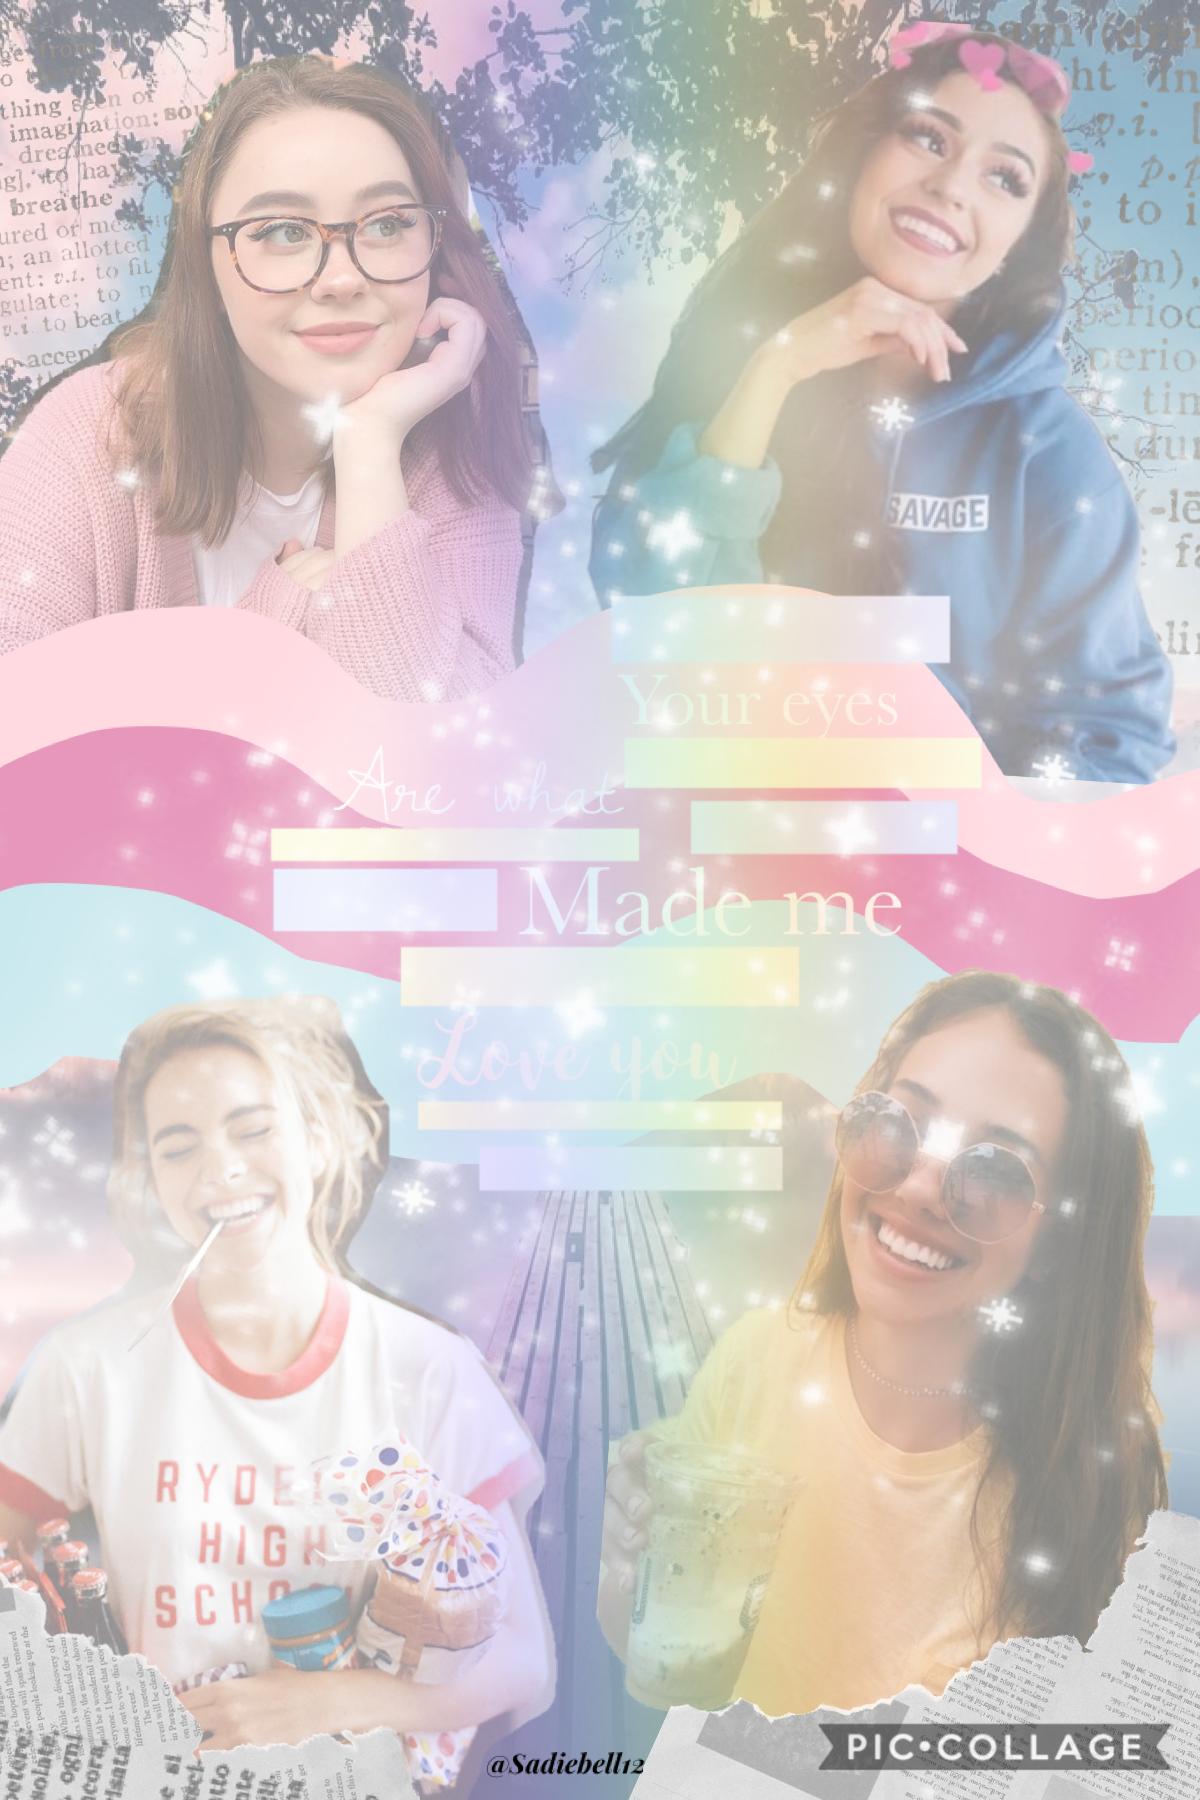 Im so excited that i have mastered this new collage style get ready to see alot like this and let me know what you think and i hope to get a feture soon🥰